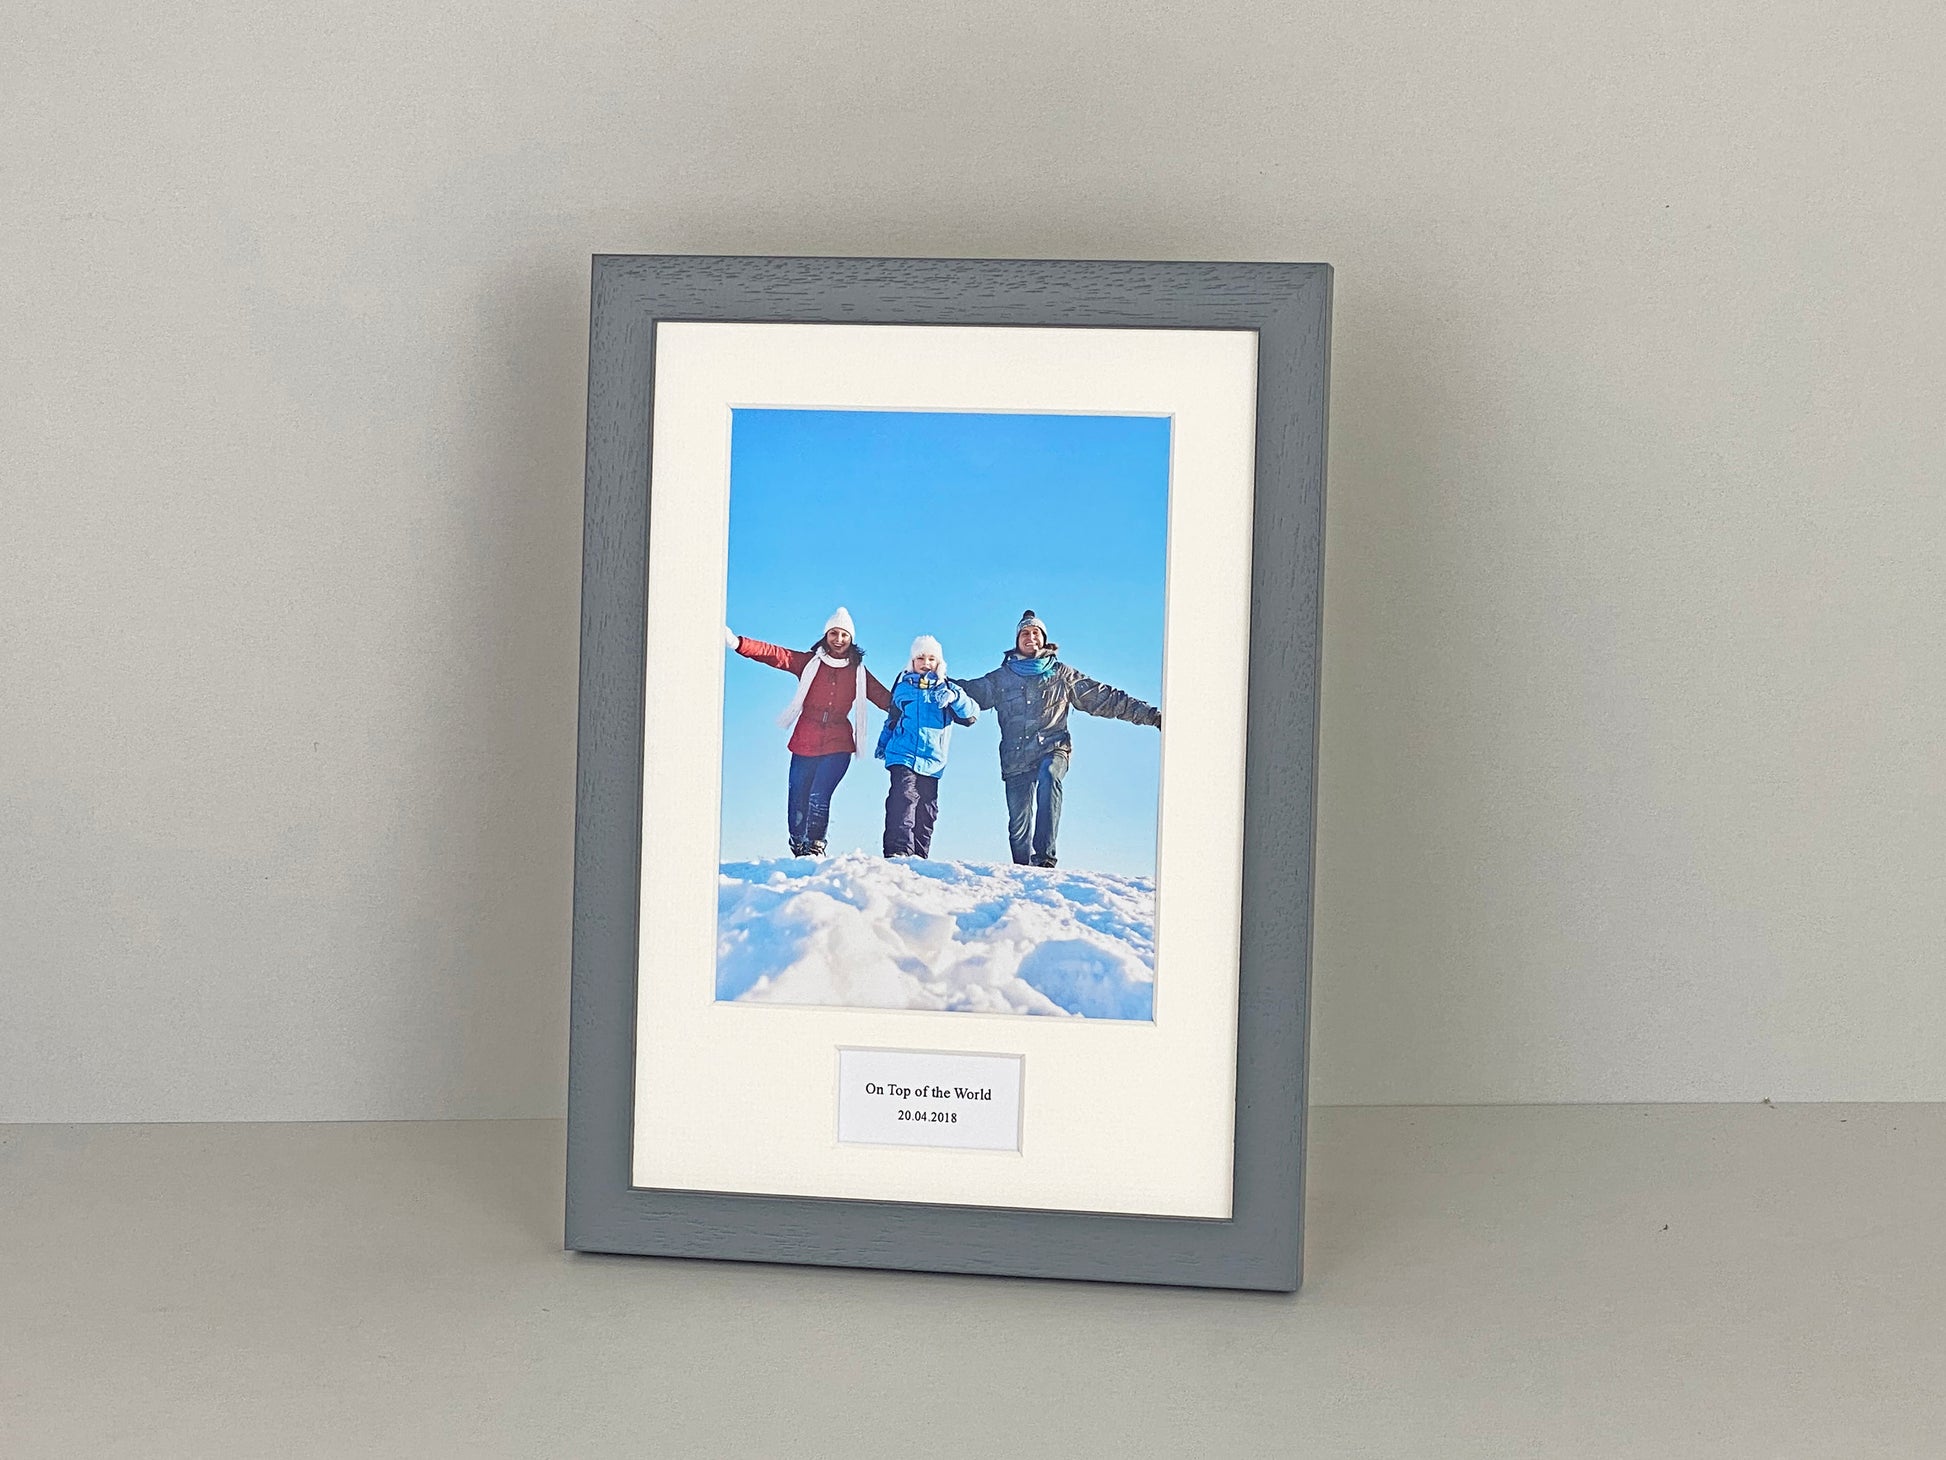 Personalised Caption Frames. A4 Frame with 8x6" Photo. Your Text and Photo to treasure a special memory. Handmade by Art@Home in the UK - PhotoFramesandMore - Wooden Picture Frames